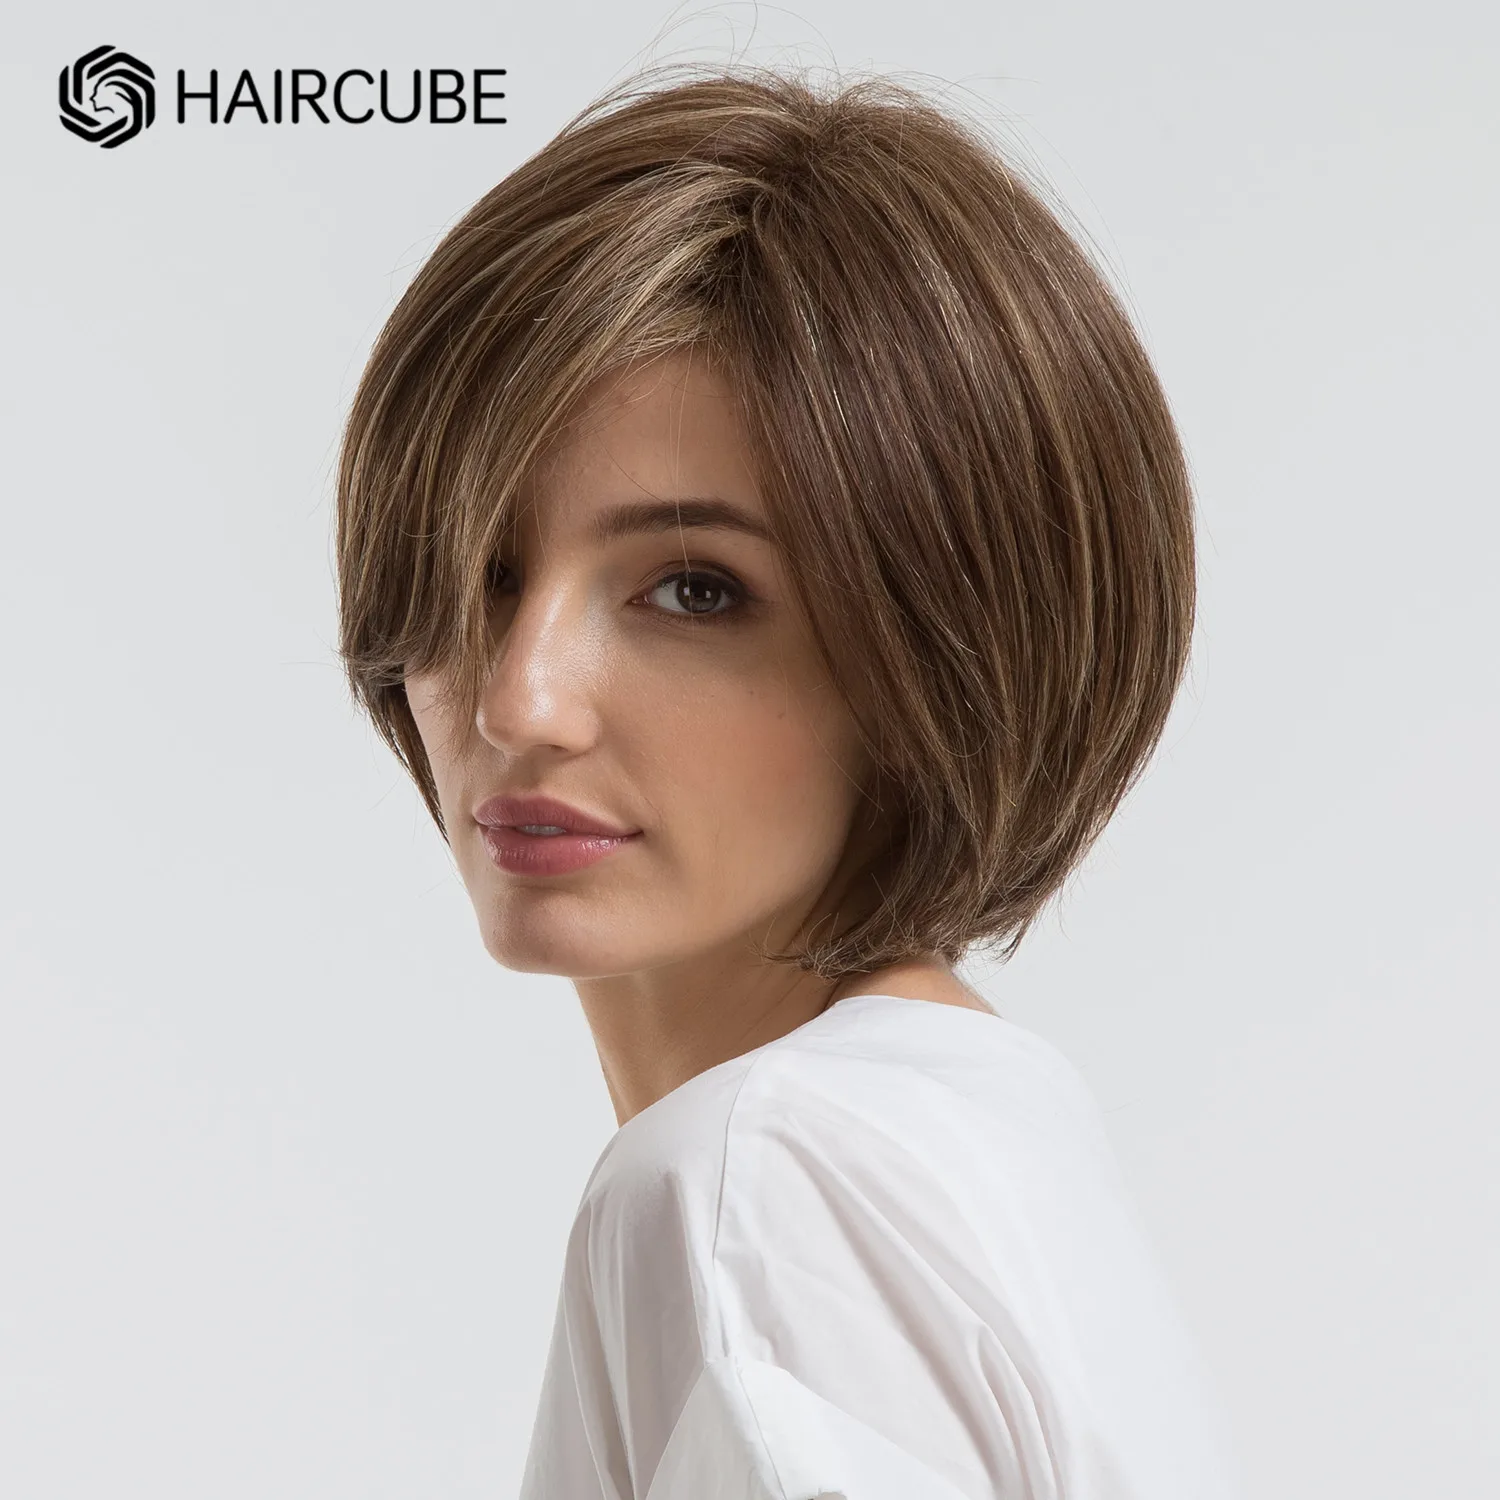 HAIRCUBE Mixed Brown Short Synthetic Wigs with Bangs High Temperature Straight Bob Wigs Blend 30% Human Hair Wig for Women